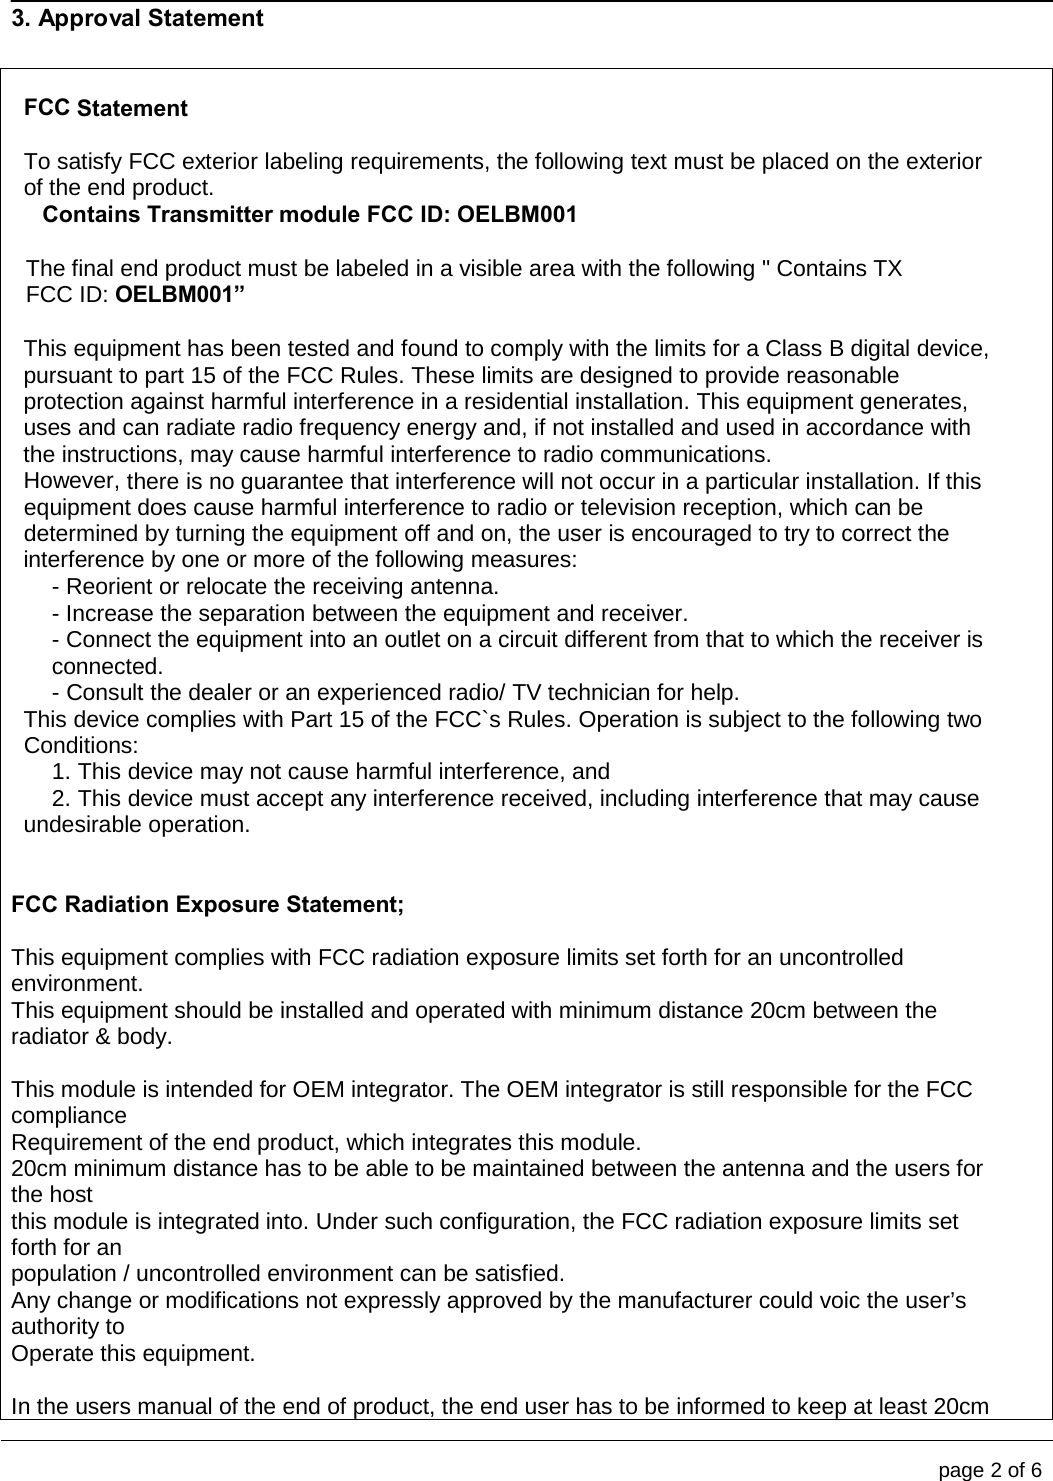                                                                                                                                           page 2 of 6    3. Approval Statement   FCC Statement  To satisfy FCC exterior labeling requirements, the following text must be placed on the exterior of the end product. Contains Transmitter module FCC ID: OELBM001  The final end product must be labeled in a visible area with the following &quot; Contains TX FCC ID: OELBM001”  This equipment has been tested and found to comply with the limits for a Class B digital device, pursuant to part 15 of the FCC Rules. These limits are designed to provide reasonable protection against harmful interference in a residential installation. This equipment generates, uses and can radiate radio frequency energy and, if not installed and used in accordance with the instructions, may cause harmful interference to radio communications. However, there is no guarantee that interference will not occur in a particular installation. If this equipment does cause harmful interference to radio or television reception, which can be determined by turning the equipment off and on, the user is encouraged to try to correct the interference by one or more of the following measures: - Reorient or relocate the receiving antenna. - Increase the separation between the equipment and receiver. - Connect the equipment into an outlet on a circuit different from that to which the receiver is connected. - Consult the dealer or an experienced radio/ TV technician for help. This device complies with Part 15 of the FCC`s Rules. Operation is subject to the following two Conditions: 1. This device may not cause harmful interference, and 2. This device must accept any interference received, including interference that may cause undesirable operation.   FCC Radiation Exposure Statement;   This equipment complies with FCC radiation exposure limits set forth for an uncontrolled environment.  This equipment should be installed and operated with minimum distance 20cm between the radiator &amp; body.   This module is intended for OEM integrator. The OEM integrator is still responsible for the FCC compliance  Requirement of the end product, which integrates this module.  20cm minimum distance has to be able to be maintained between the antenna and the users for the host  this module is integrated into. Under such configuration, the FCC radiation exposure limits set forth for an  population / uncontrolled environment can be satisfied.  Any change or modifications not expressly approved by the manufacturer could voic the user’s authority to  Operate this equipment.   In the users manual of the end of product, the end user has to be informed to keep at least 20cm 